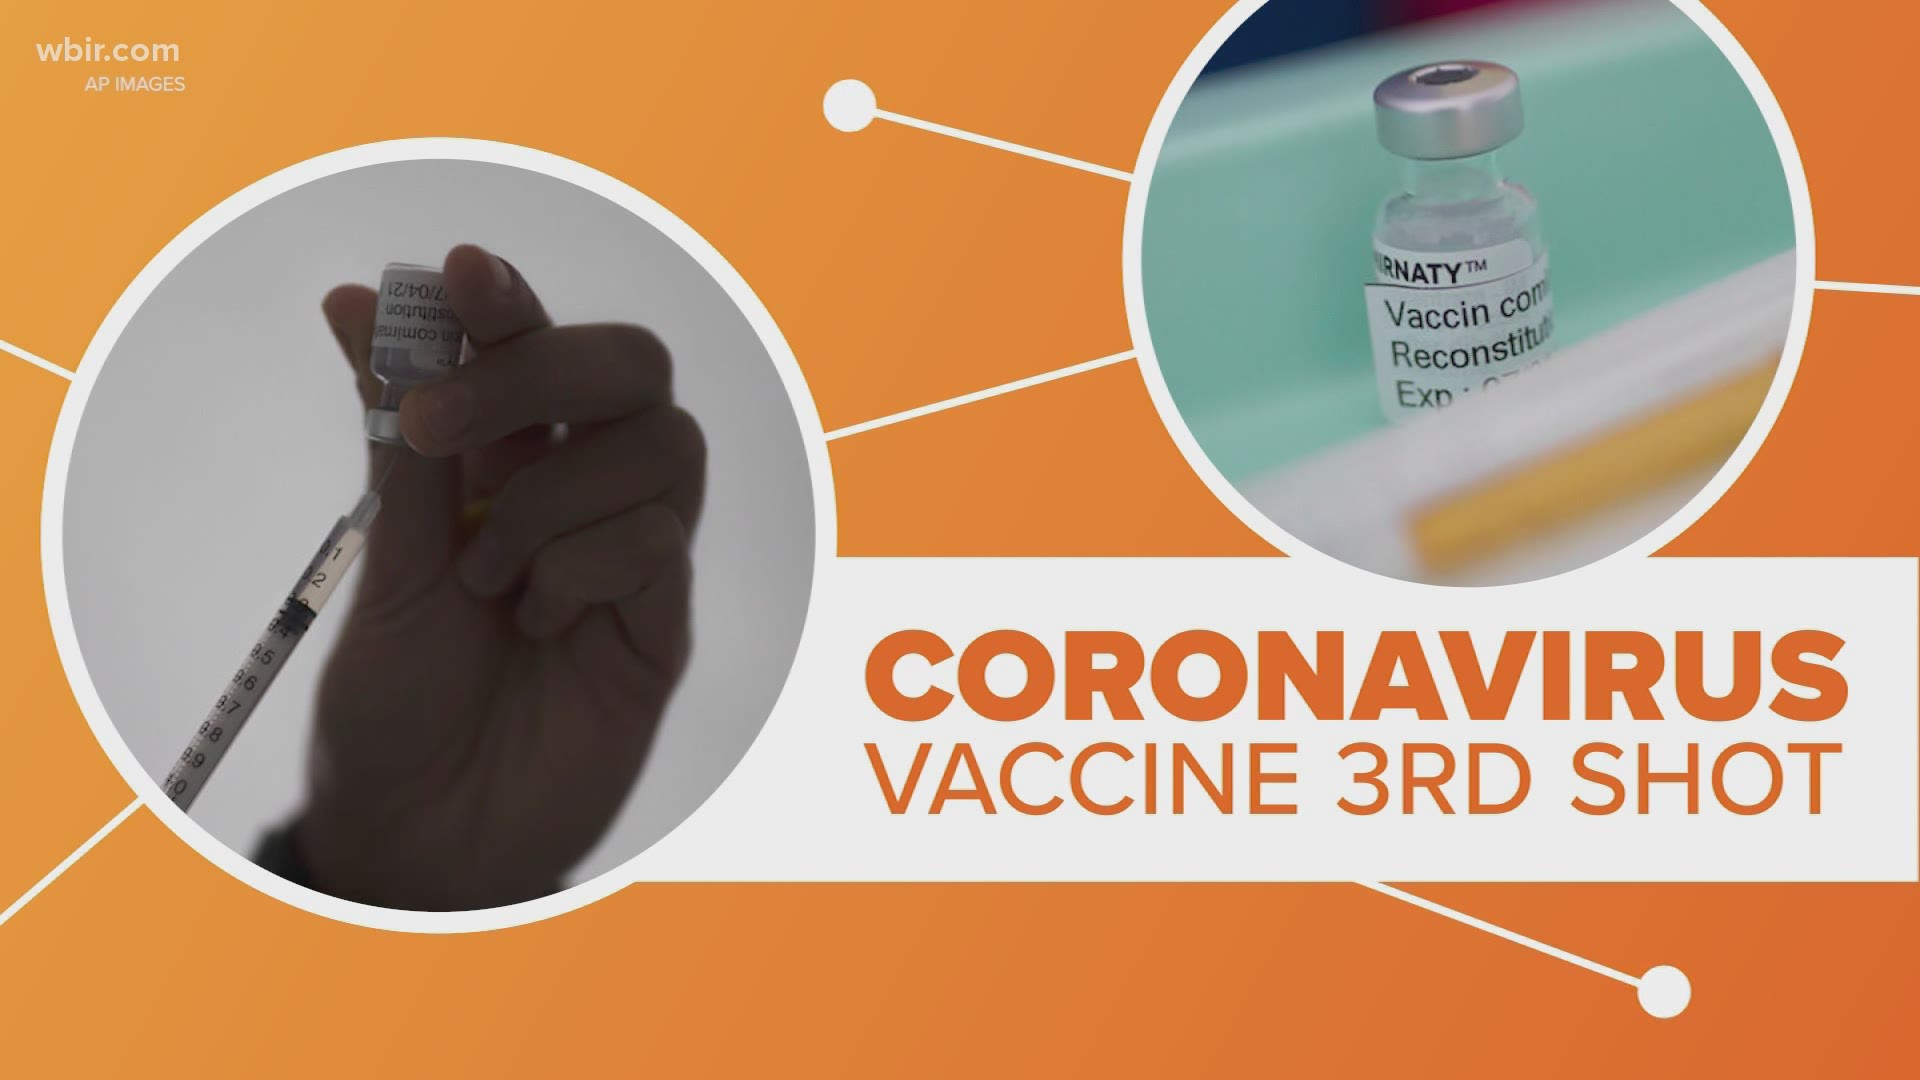 It is looking more likely that we will need a booster shot of the COVID-19 vaccine, at least when it comes to Pfizer's vaccine. Let's connect the dots!